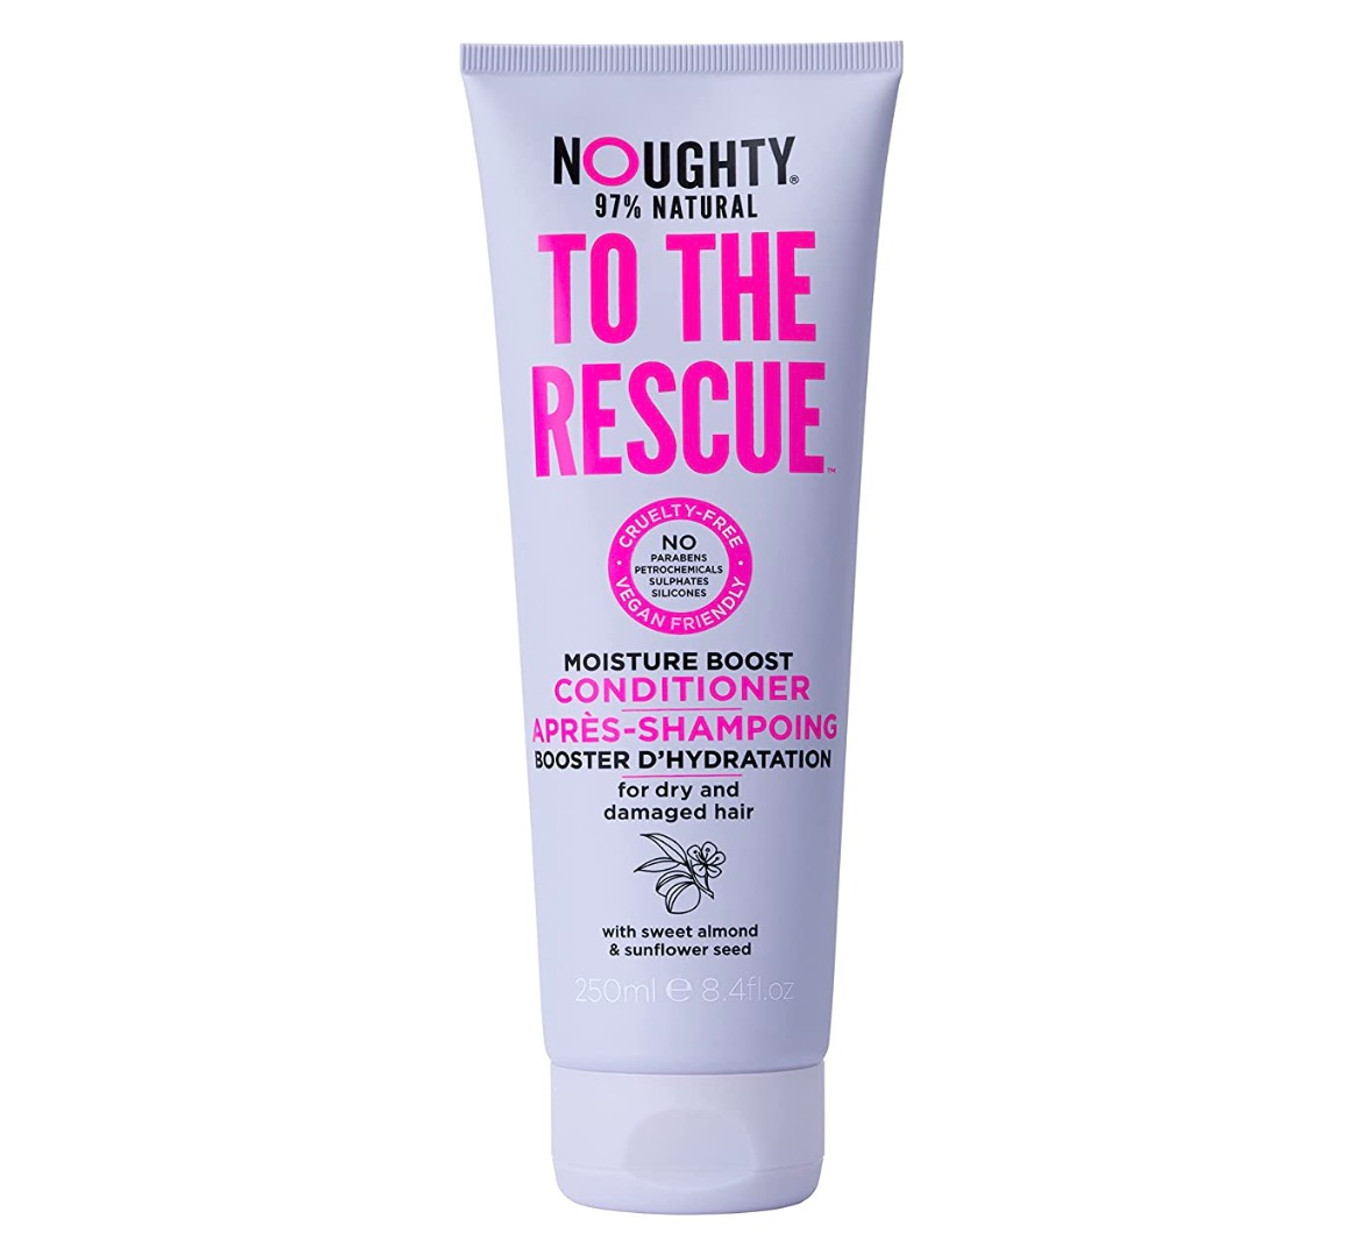 Noughty To The Rescue Moisture Boost Conditioner (8.4 oz)